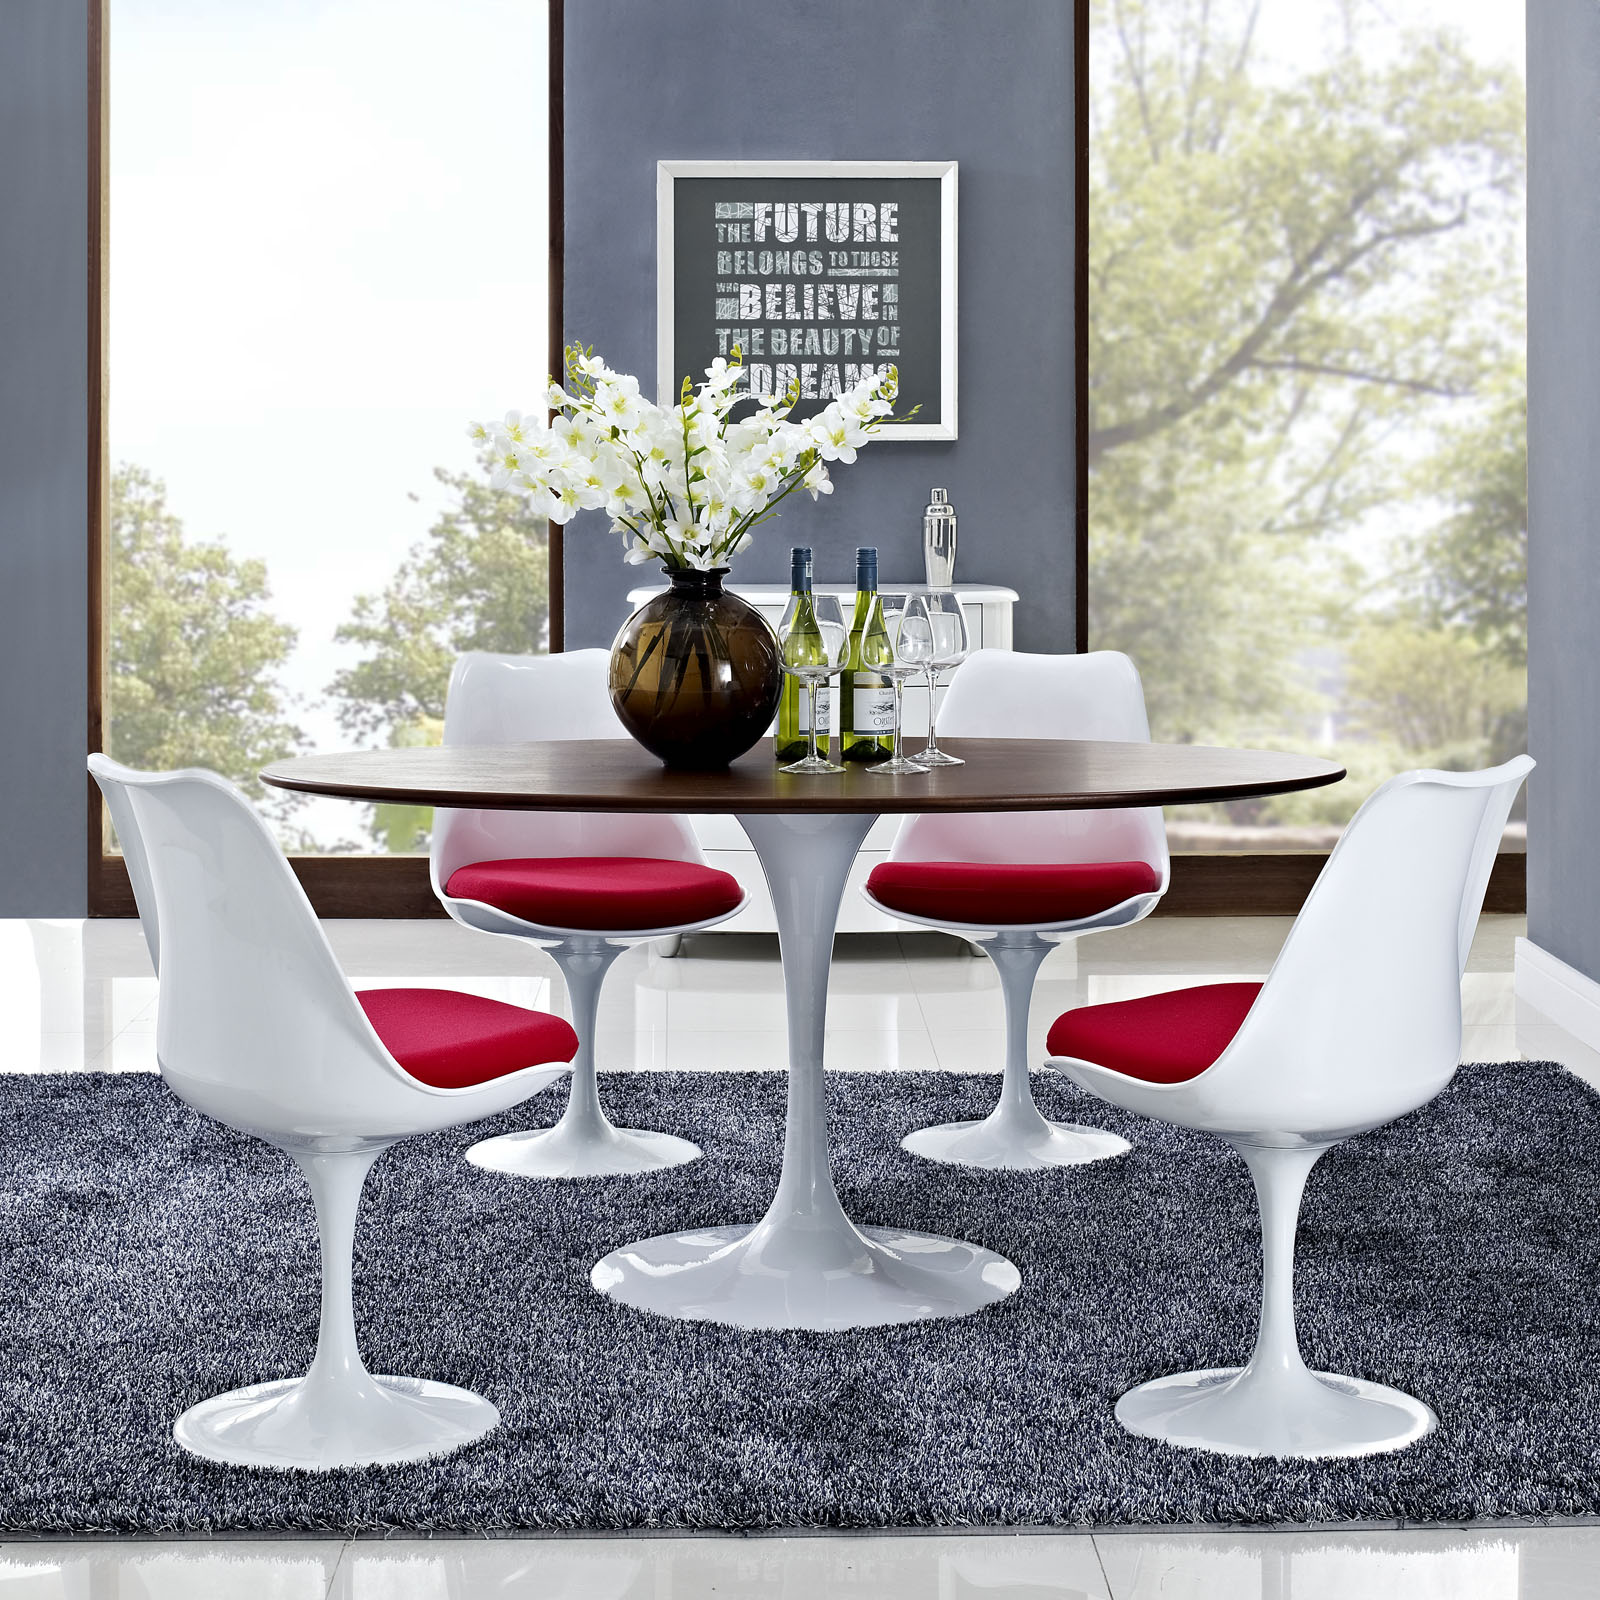 flower-dining-table-oval-with-tulip-chairs.jpg